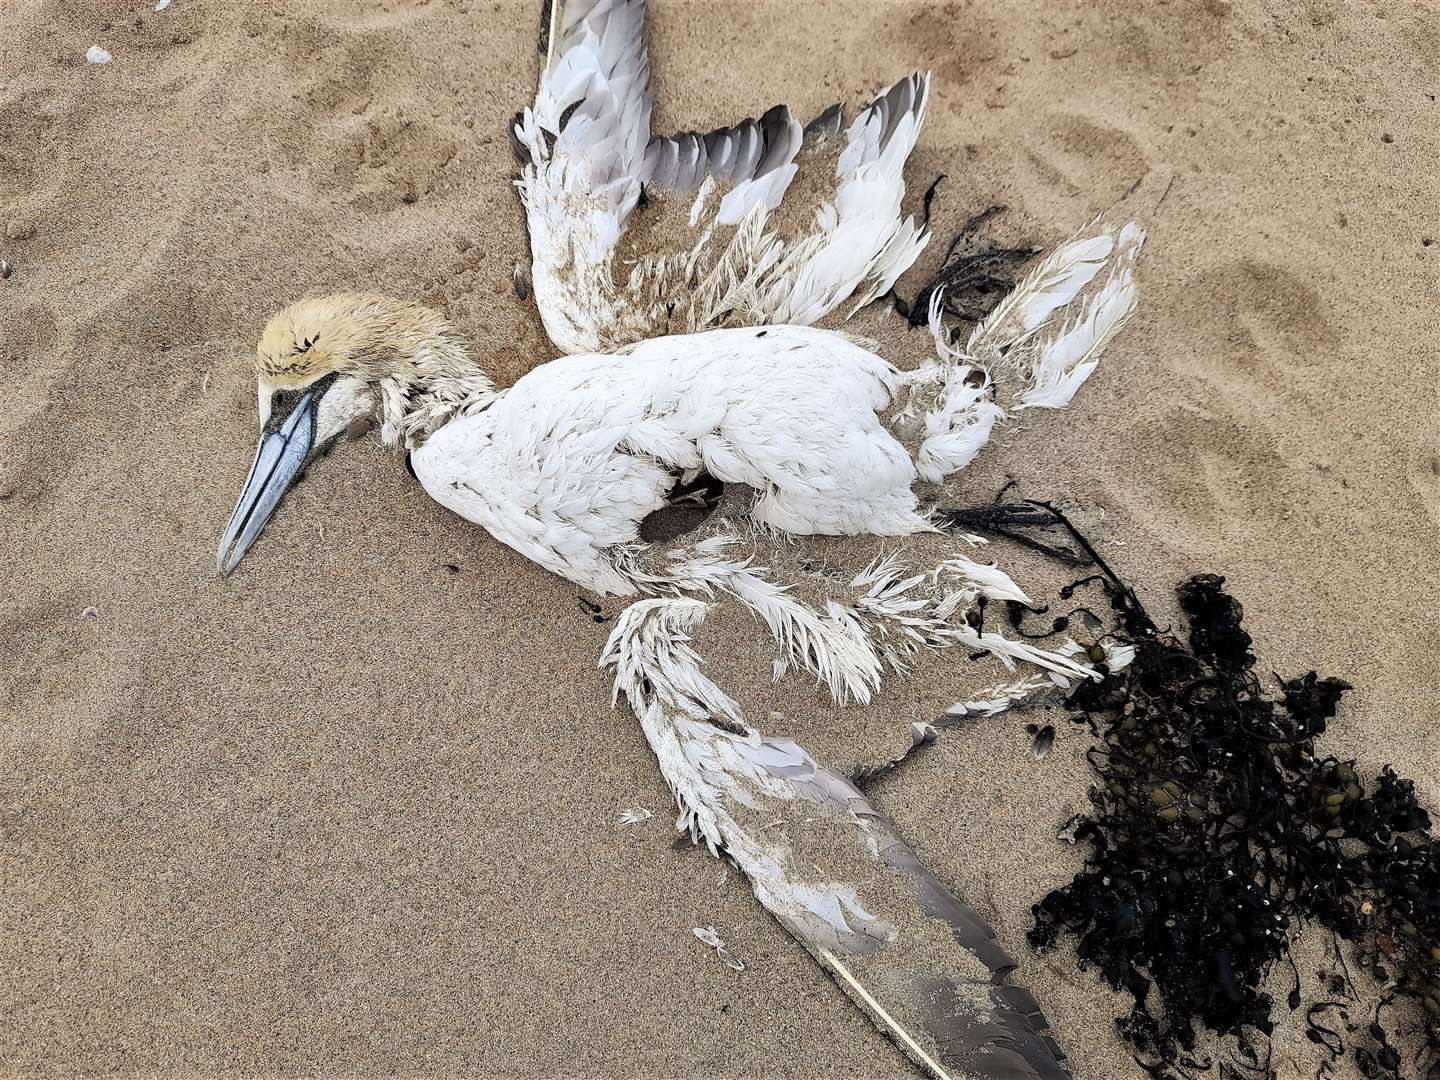 Another gannet carcass lying on Dunnet beach that is believed to be a victim of avian flu.